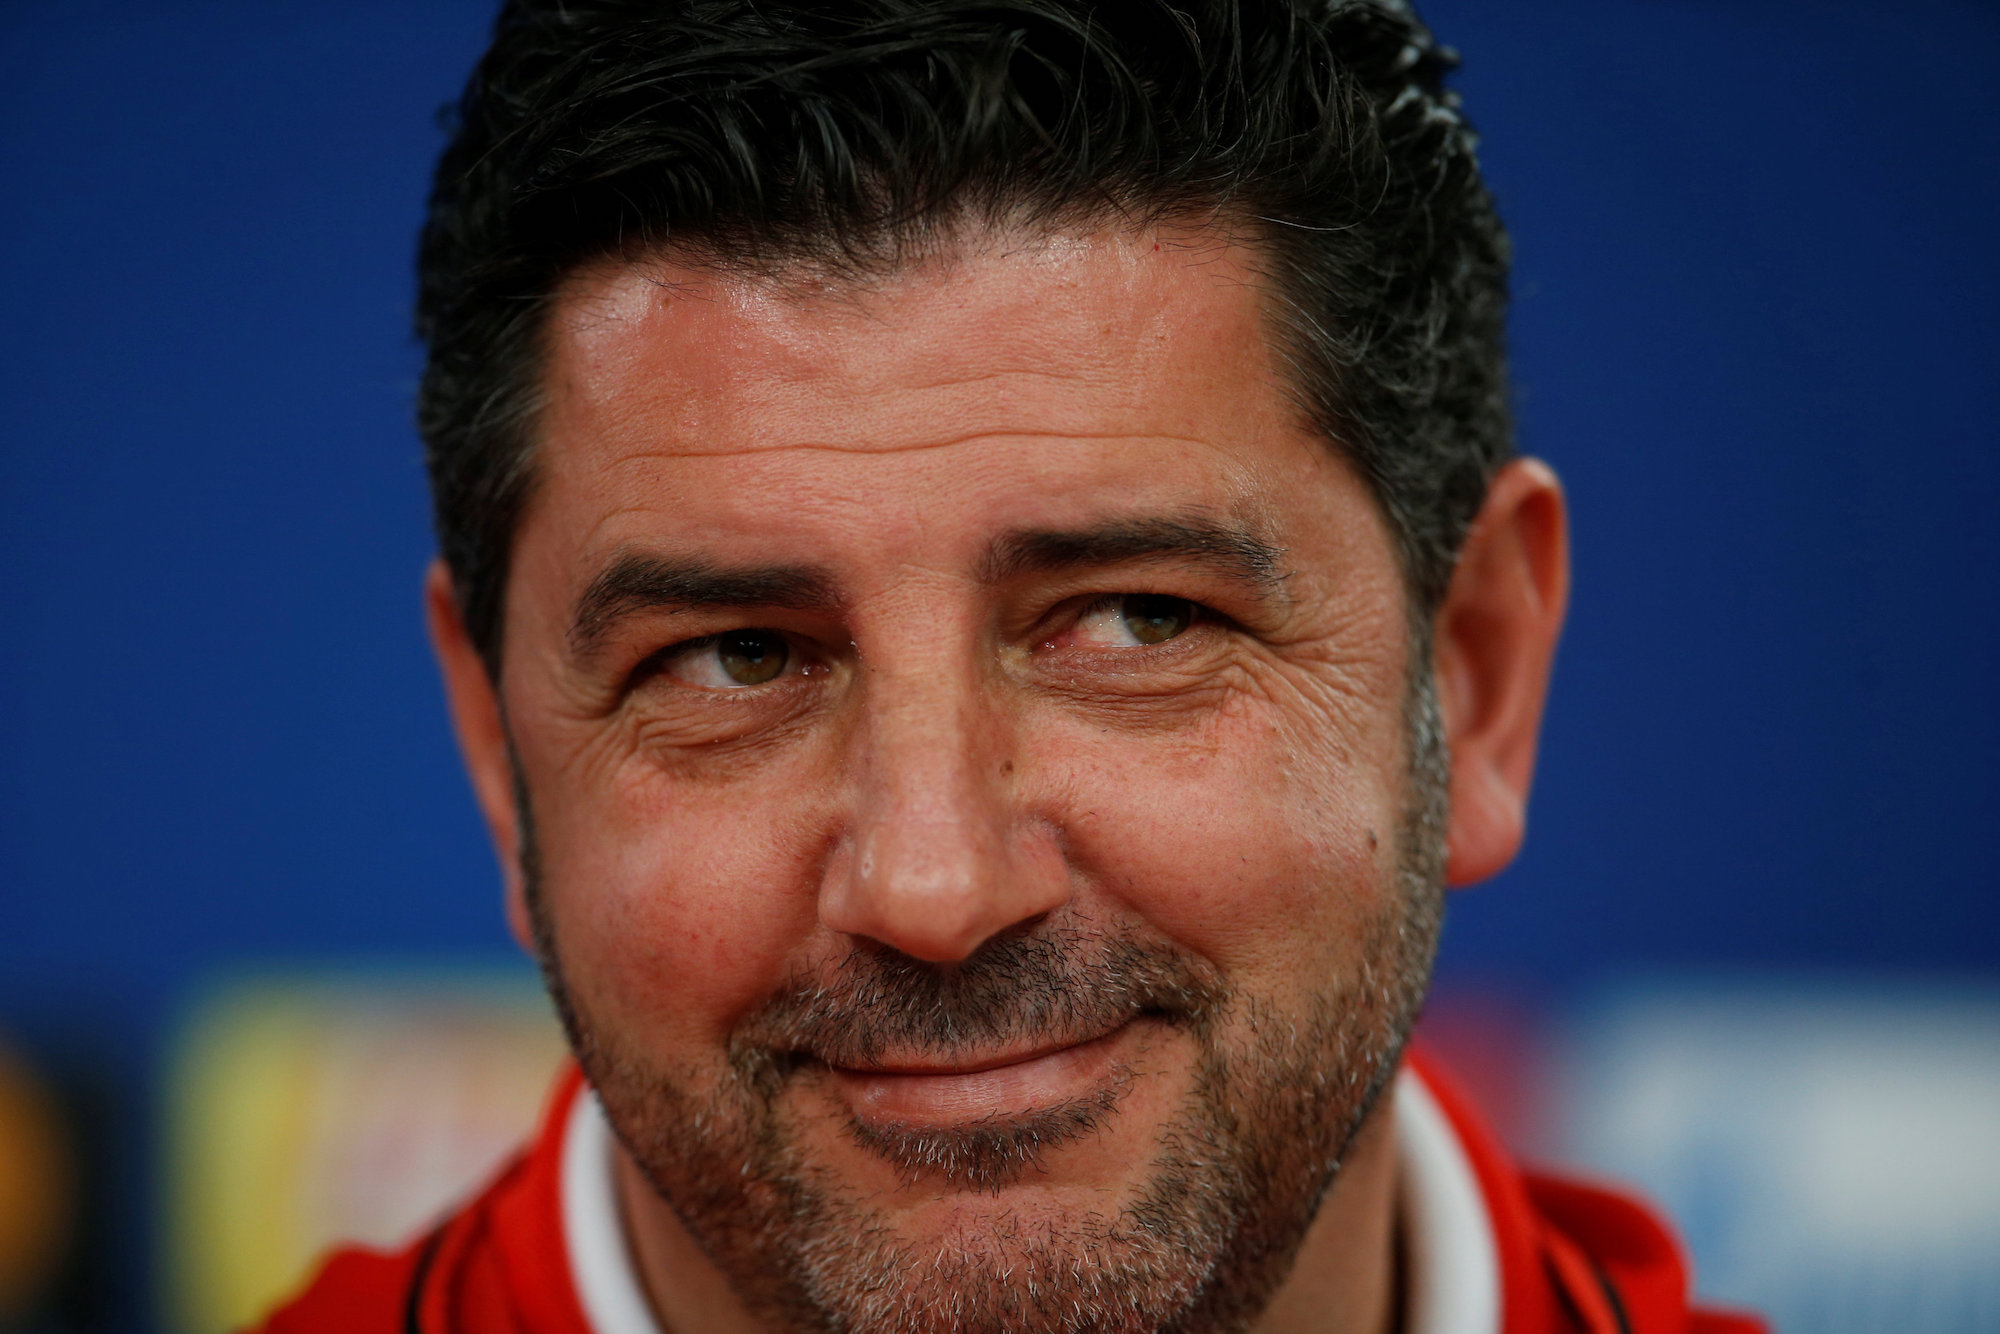 Football Soccer - Benfica news conference - UEFA Champions League - Lisbon, Portugal - 13/02/17. Benfica's coach Rui Vitoria attends a news conference. REUTERS/Rafael Marchante